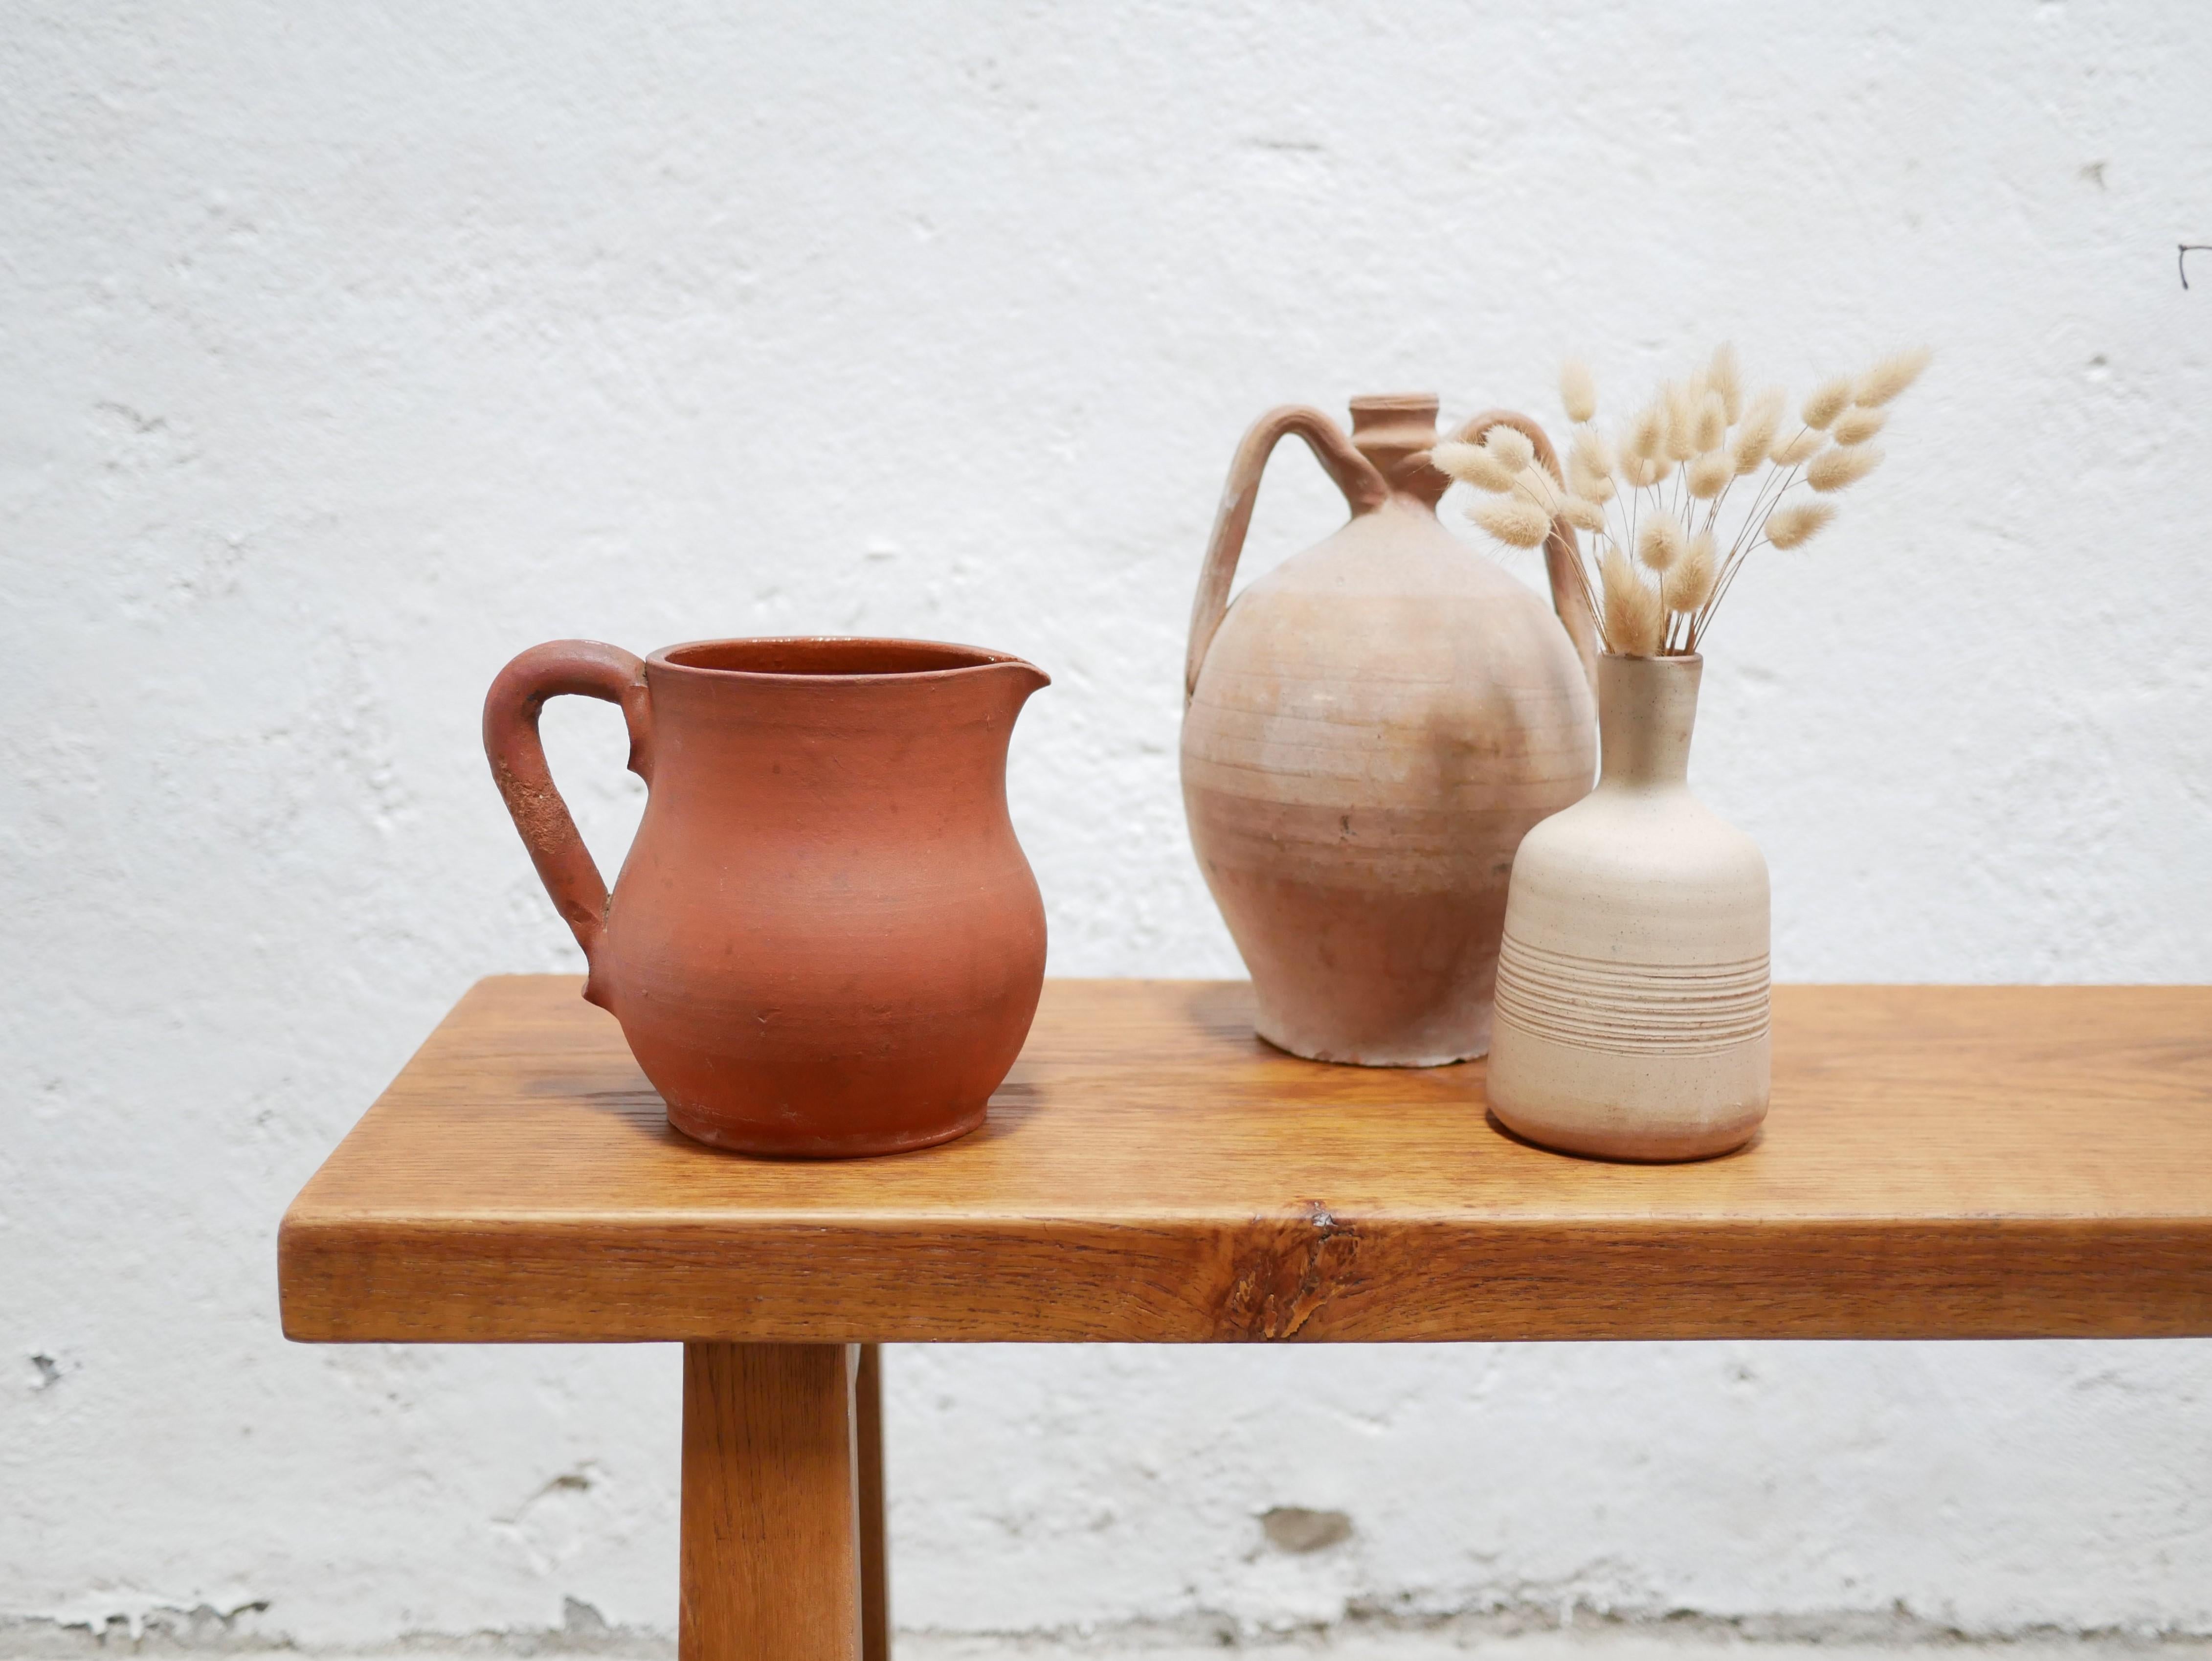 Terracotta pitcher from the 1960s.

With its modern shape and mineral hue, this ceramic will be perfect in a natural, refined and delicate decoration.
We simply imagine it placed on a shelf or piece of furniture, adorned with a few dried flowers